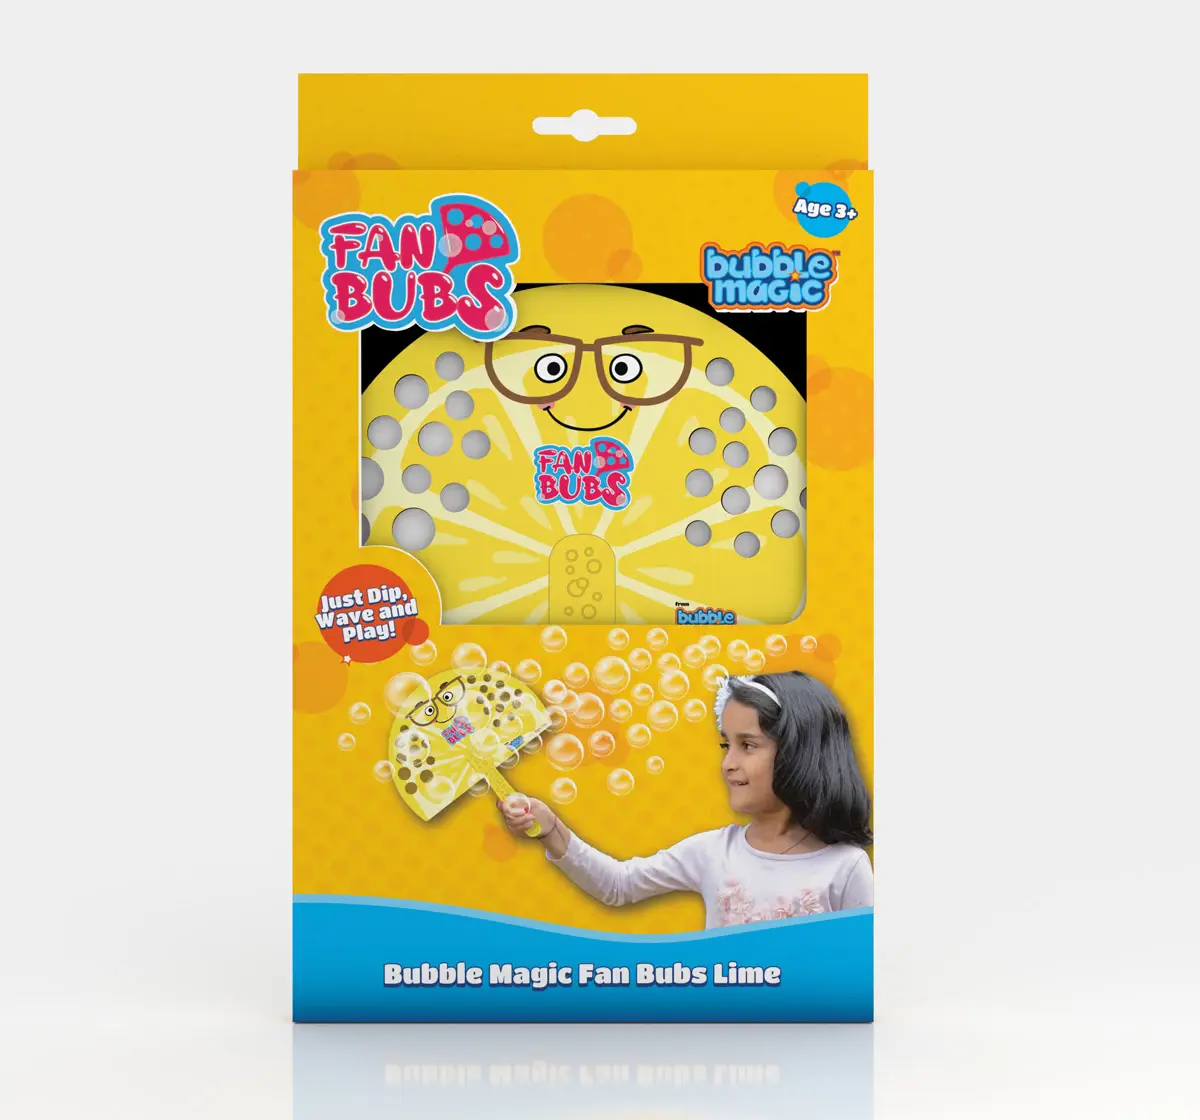 Bubble Magic Fan Bubs Lime, for The Kids 3 Years and Above